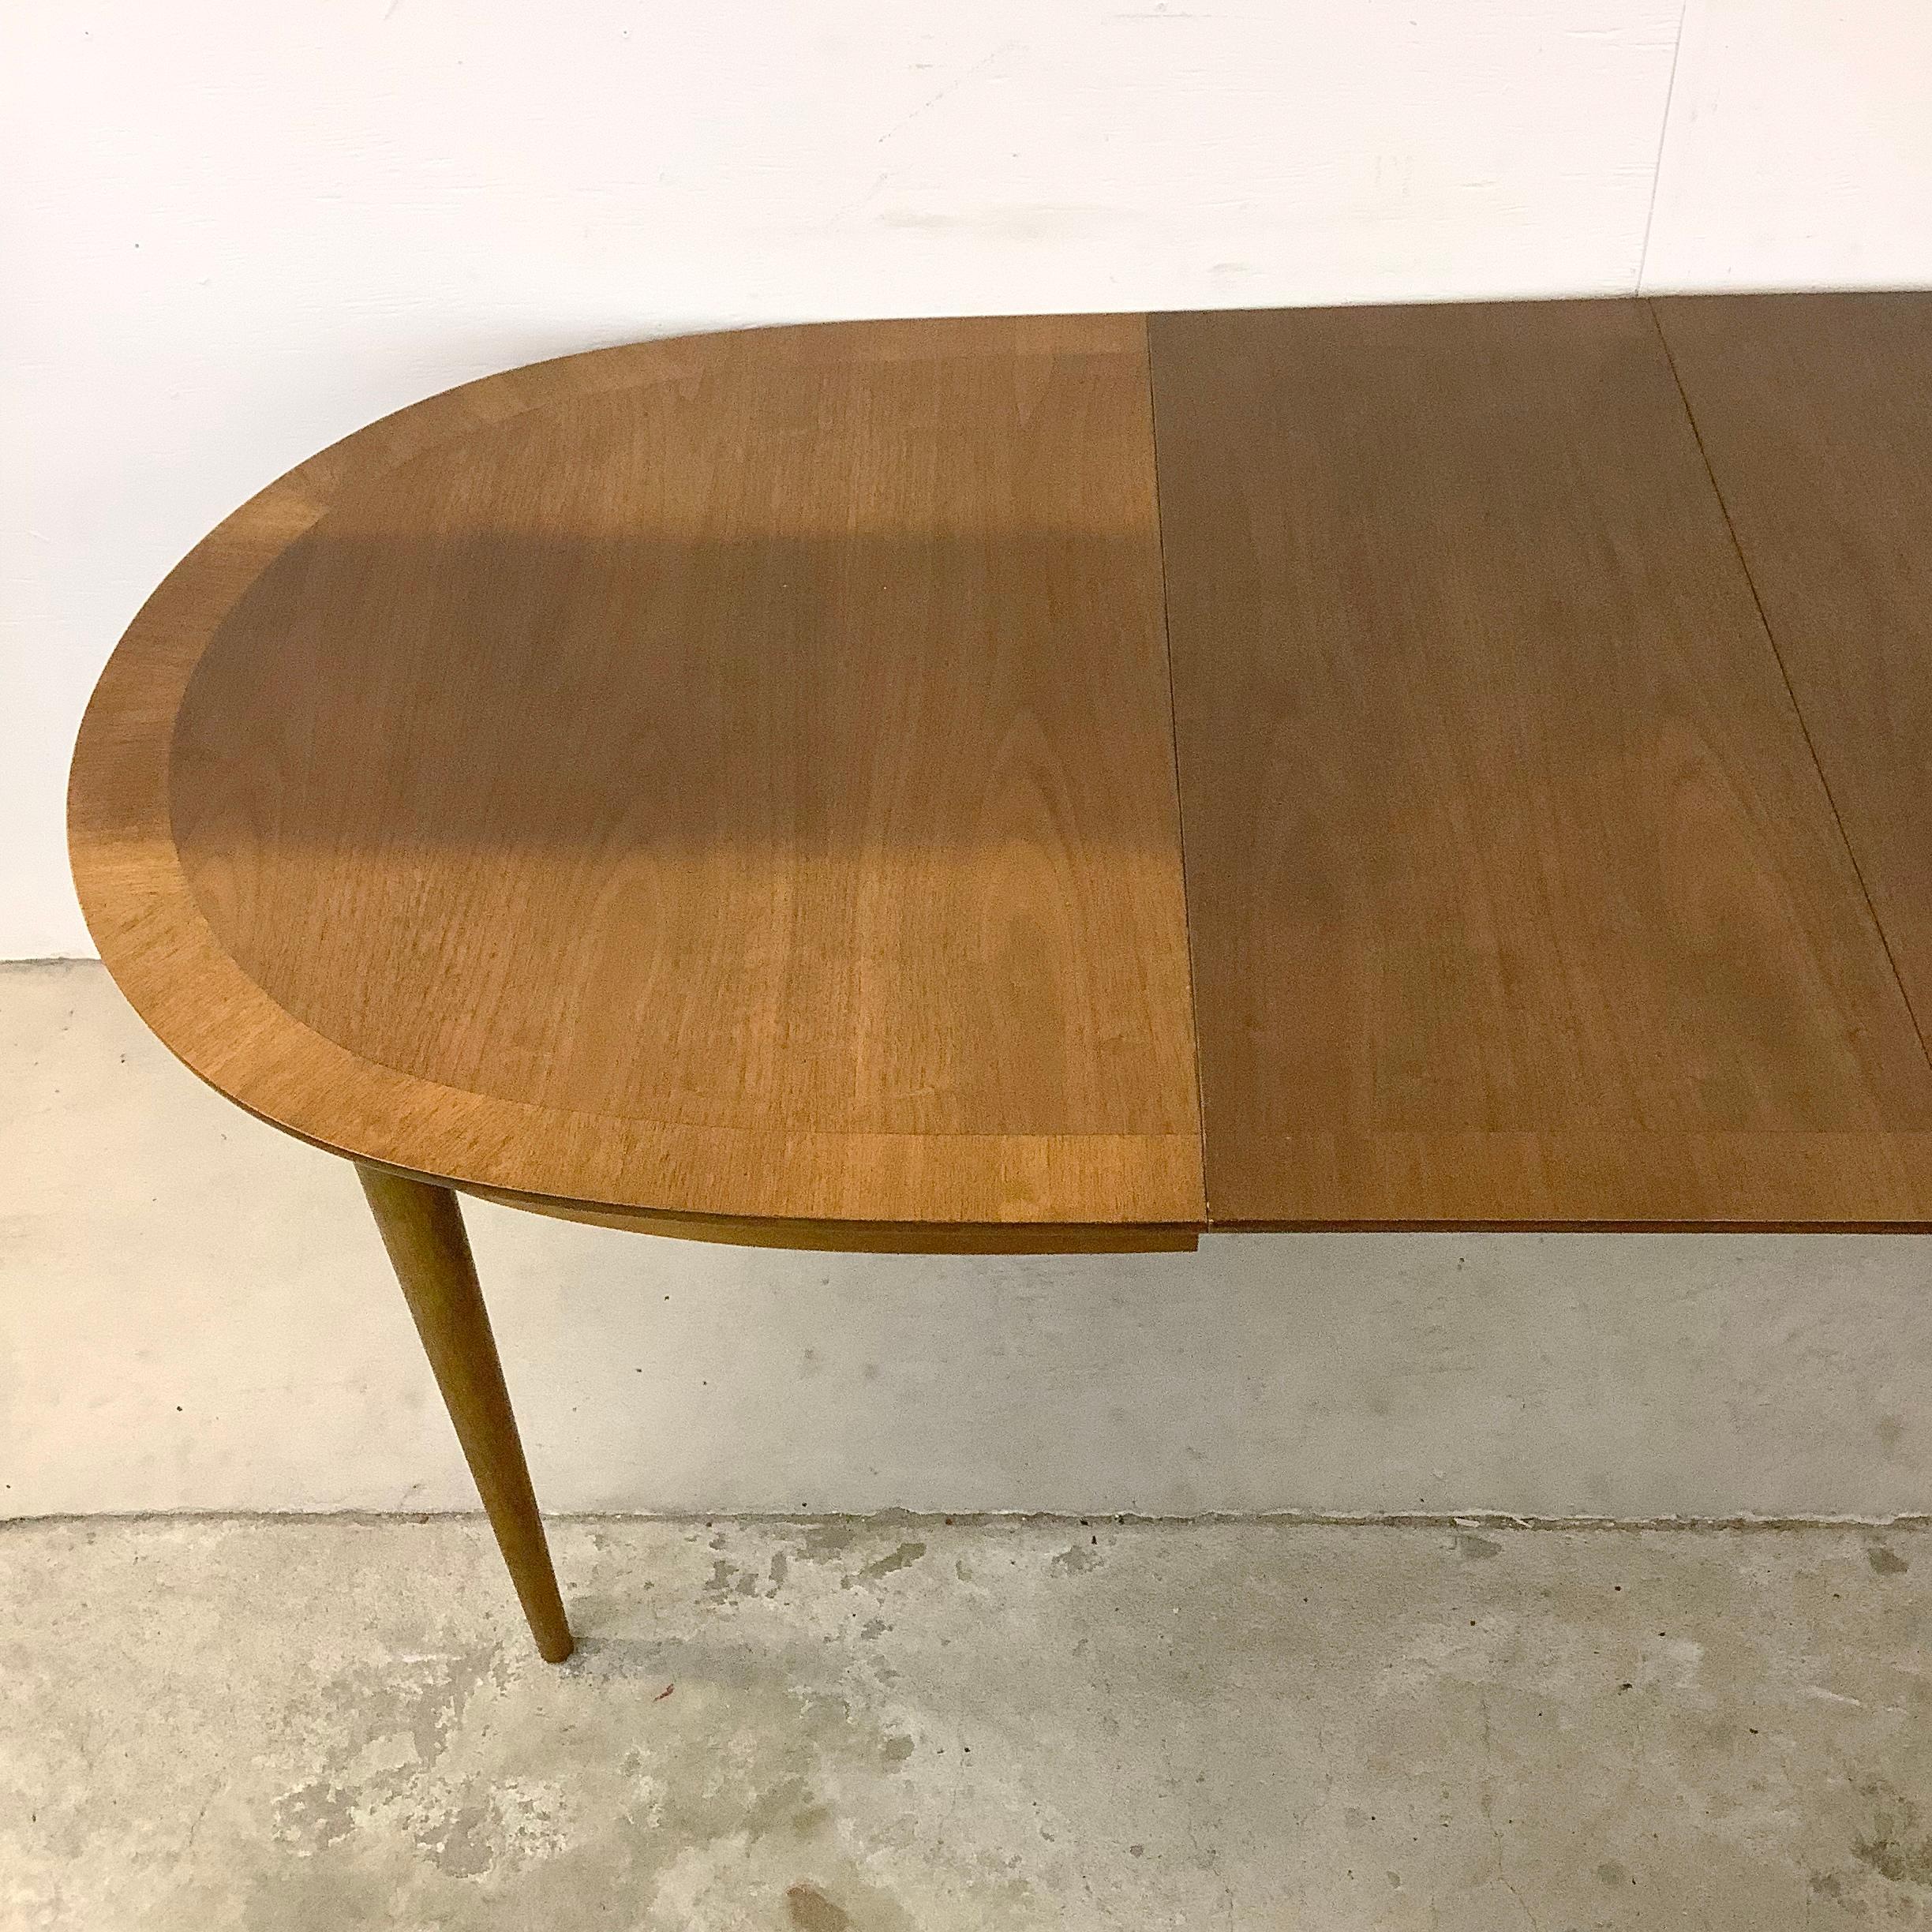 Wood Vintage Modern R-Way Dining Table With Leaves